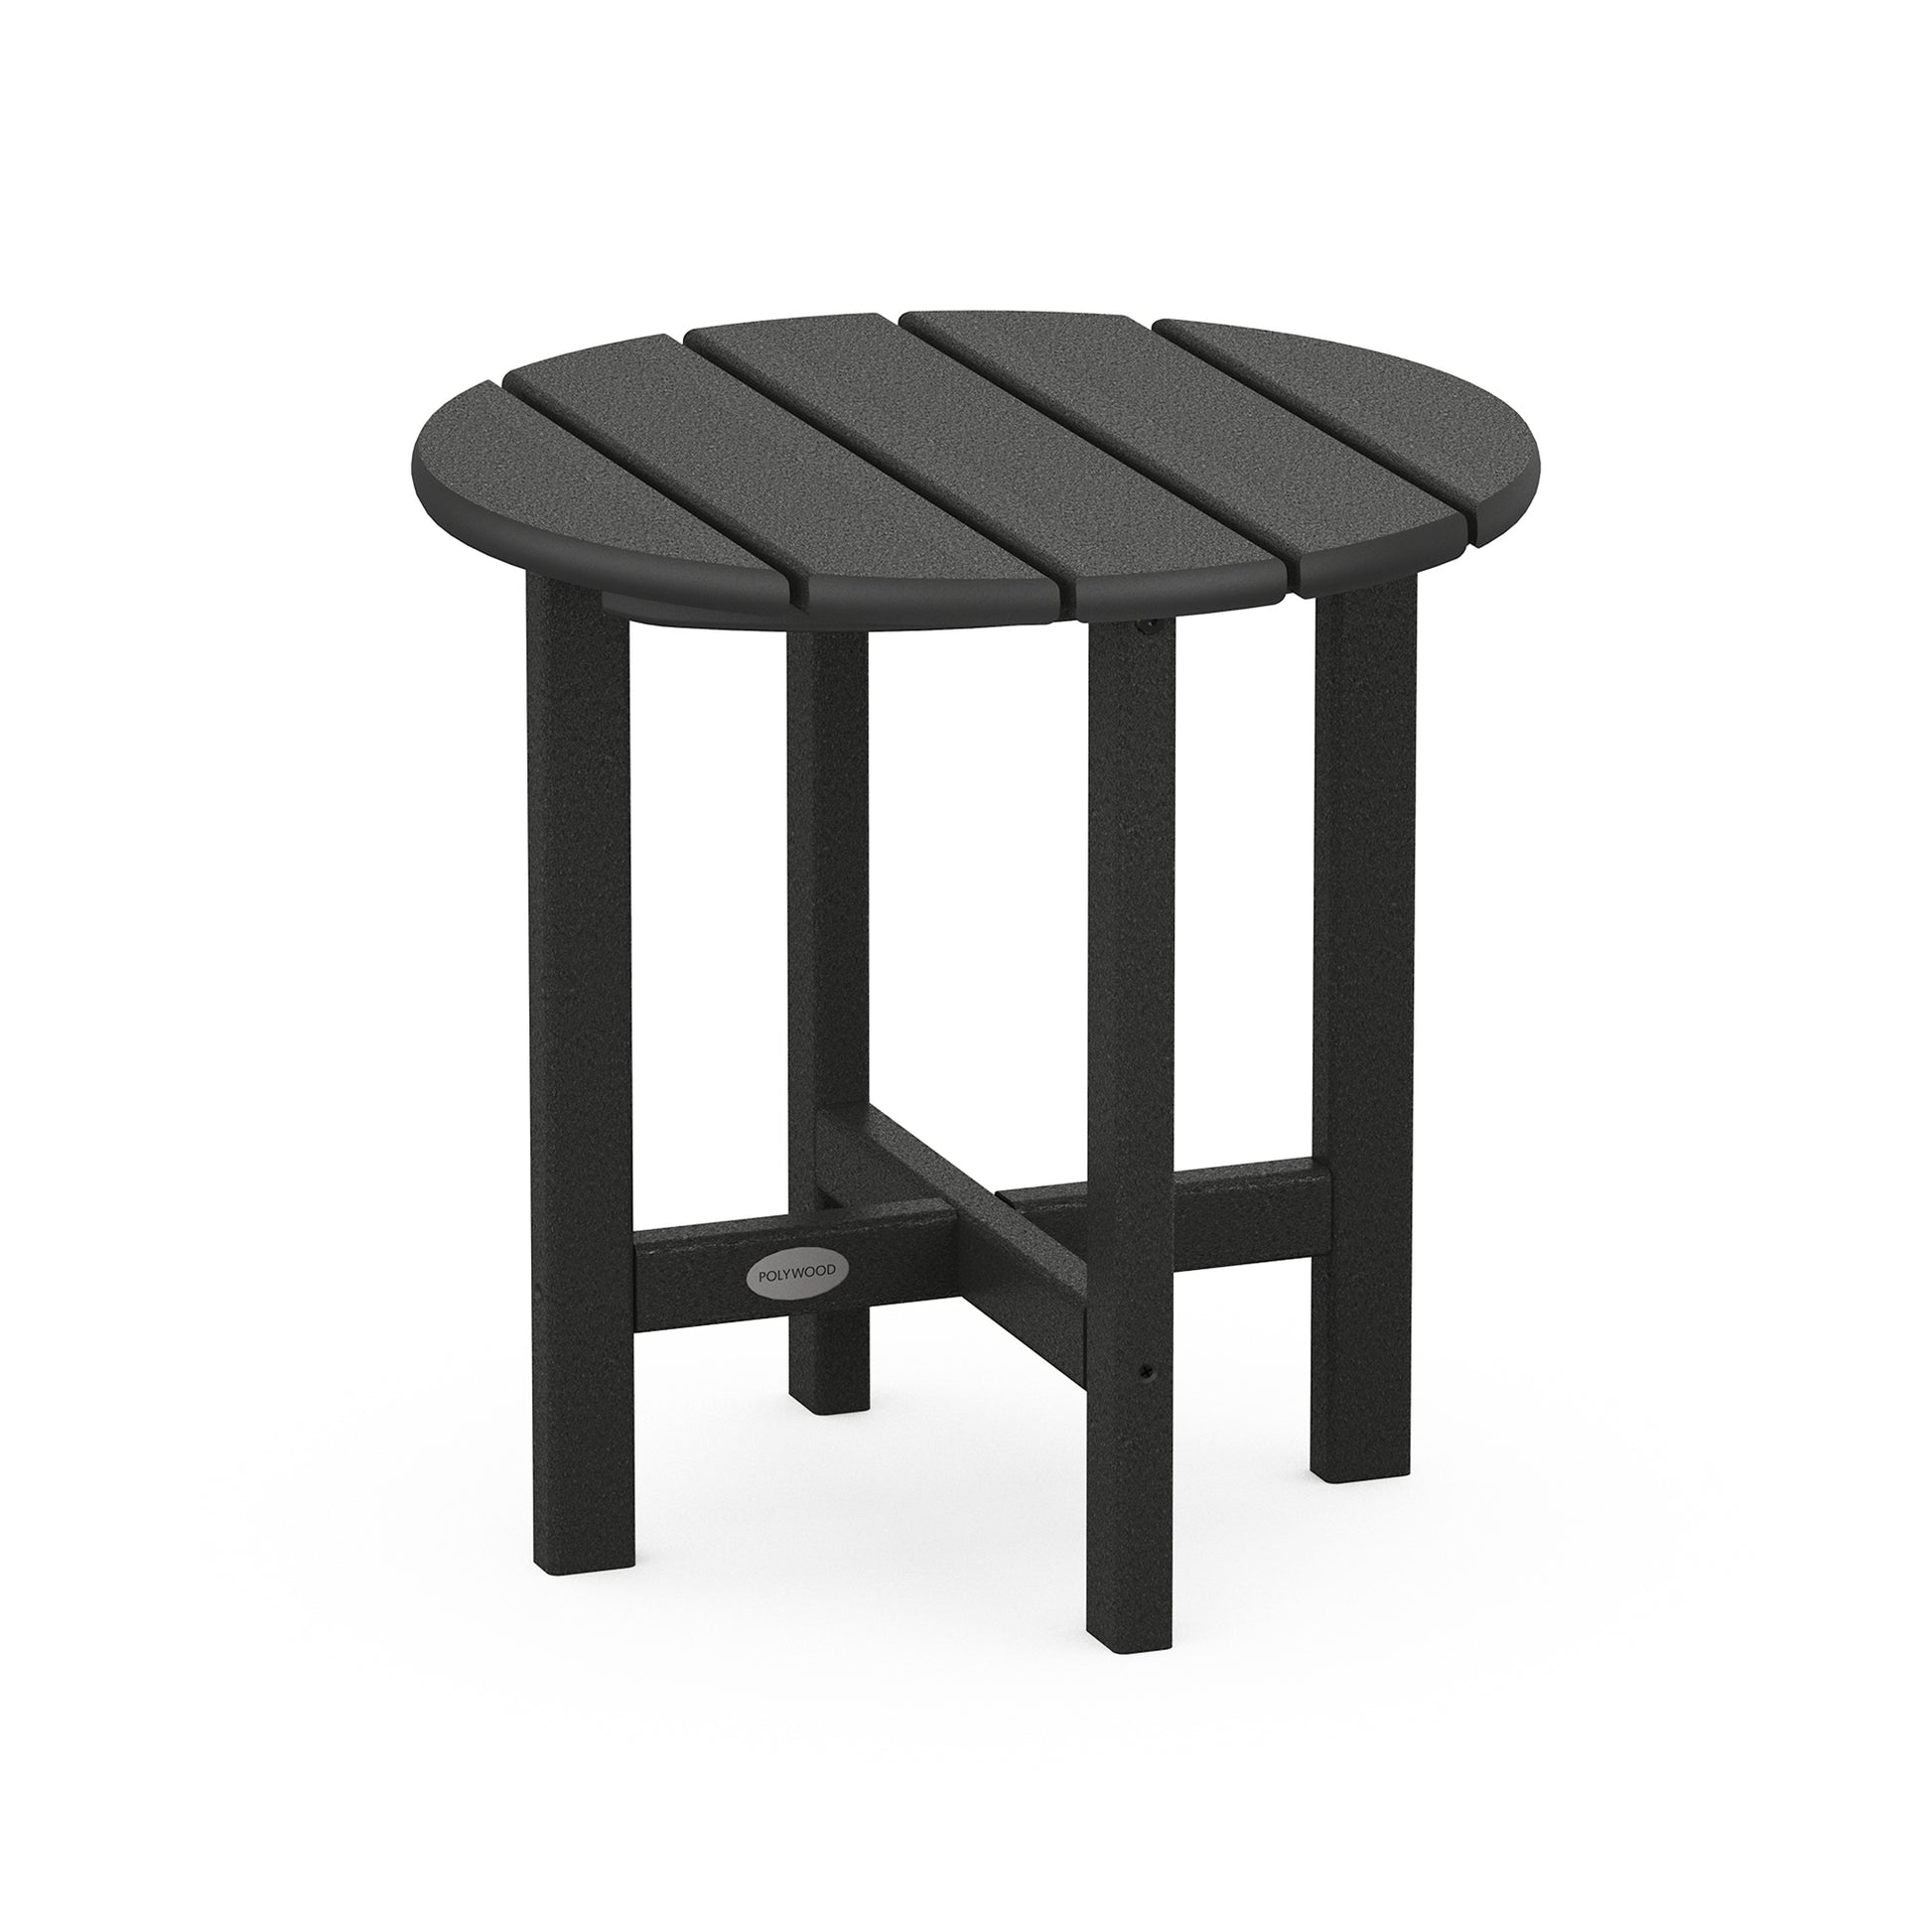 A modern black POLYWOOD 18" Round Side Table made of durable POLYWOOD material with a textured finish, supported by four sturdy legs, depicted on a plain white background.